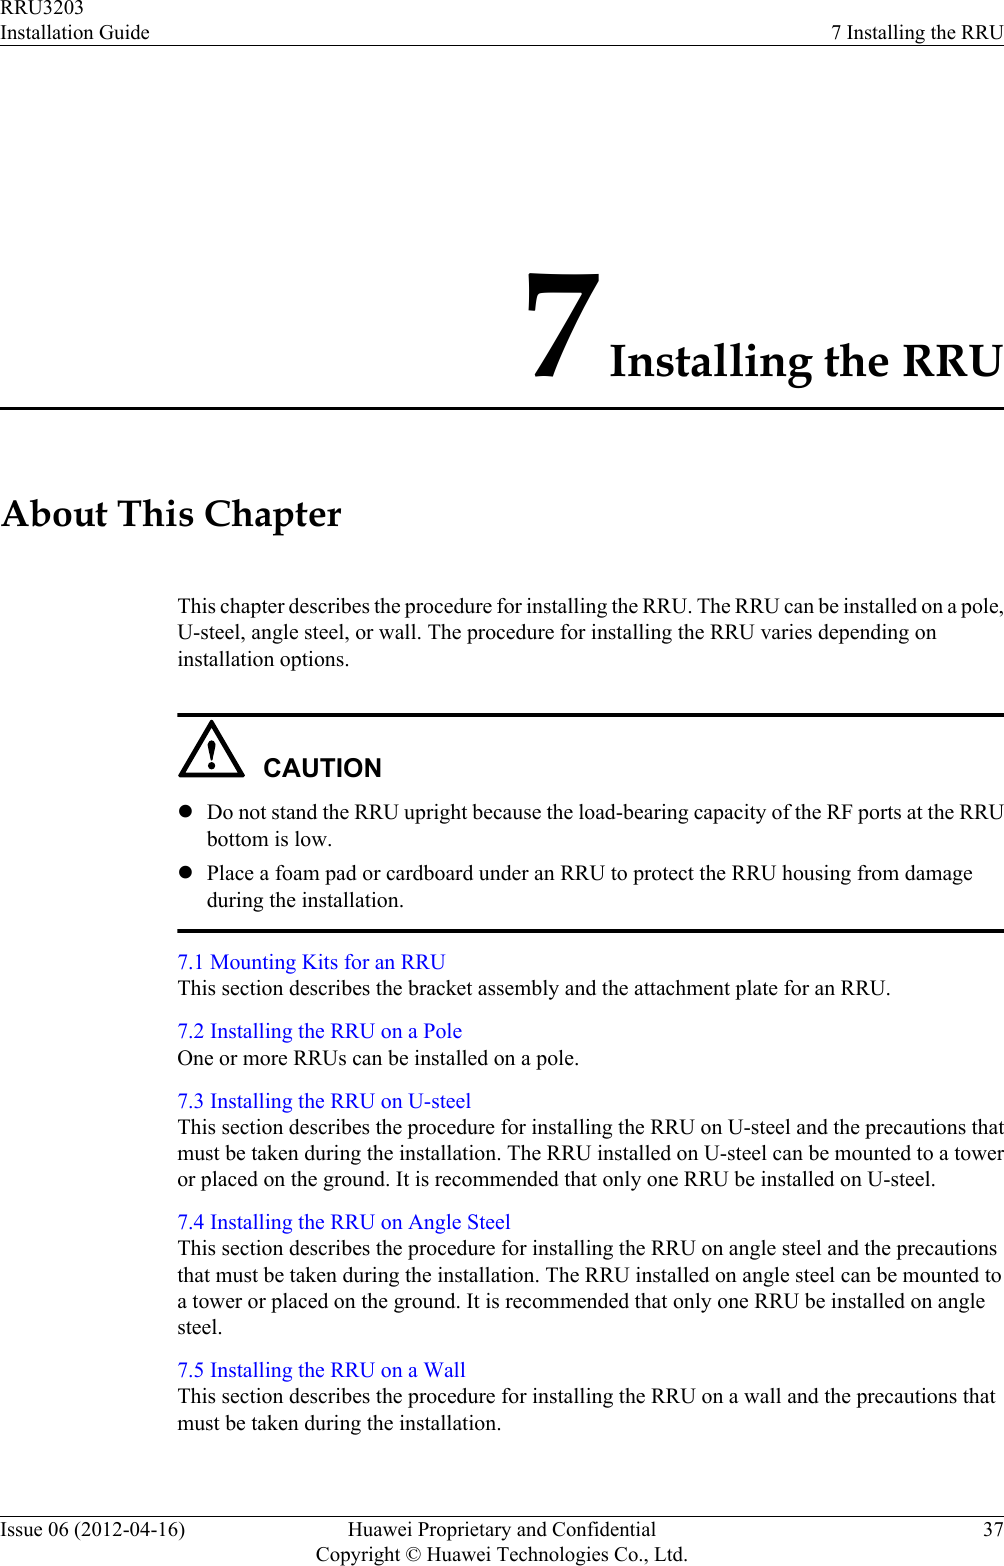 7 Installing the RRUAbout This ChapterThis chapter describes the procedure for installing the RRU. The RRU can be installed on a pole,U-steel, angle steel, or wall. The procedure for installing the RRU varies depending oninstallation options.CAUTIONlDo not stand the RRU upright because the load-bearing capacity of the RF ports at the RRUbottom is low.lPlace a foam pad or cardboard under an RRU to protect the RRU housing from damageduring the installation.7.1 Mounting Kits for an RRUThis section describes the bracket assembly and the attachment plate for an RRU.7.2 Installing the RRU on a PoleOne or more RRUs can be installed on a pole.7.3 Installing the RRU on U-steelThis section describes the procedure for installing the RRU on U-steel and the precautions thatmust be taken during the installation. The RRU installed on U-steel can be mounted to a toweror placed on the ground. It is recommended that only one RRU be installed on U-steel.7.4 Installing the RRU on Angle SteelThis section describes the procedure for installing the RRU on angle steel and the precautionsthat must be taken during the installation. The RRU installed on angle steel can be mounted toa tower or placed on the ground. It is recommended that only one RRU be installed on anglesteel.7.5 Installing the RRU on a WallThis section describes the procedure for installing the RRU on a wall and the precautions thatmust be taken during the installation.RRU3203Installation Guide 7 Installing the RRUIssue 06 (2012-04-16) Huawei Proprietary and ConfidentialCopyright © Huawei Technologies Co., Ltd.37